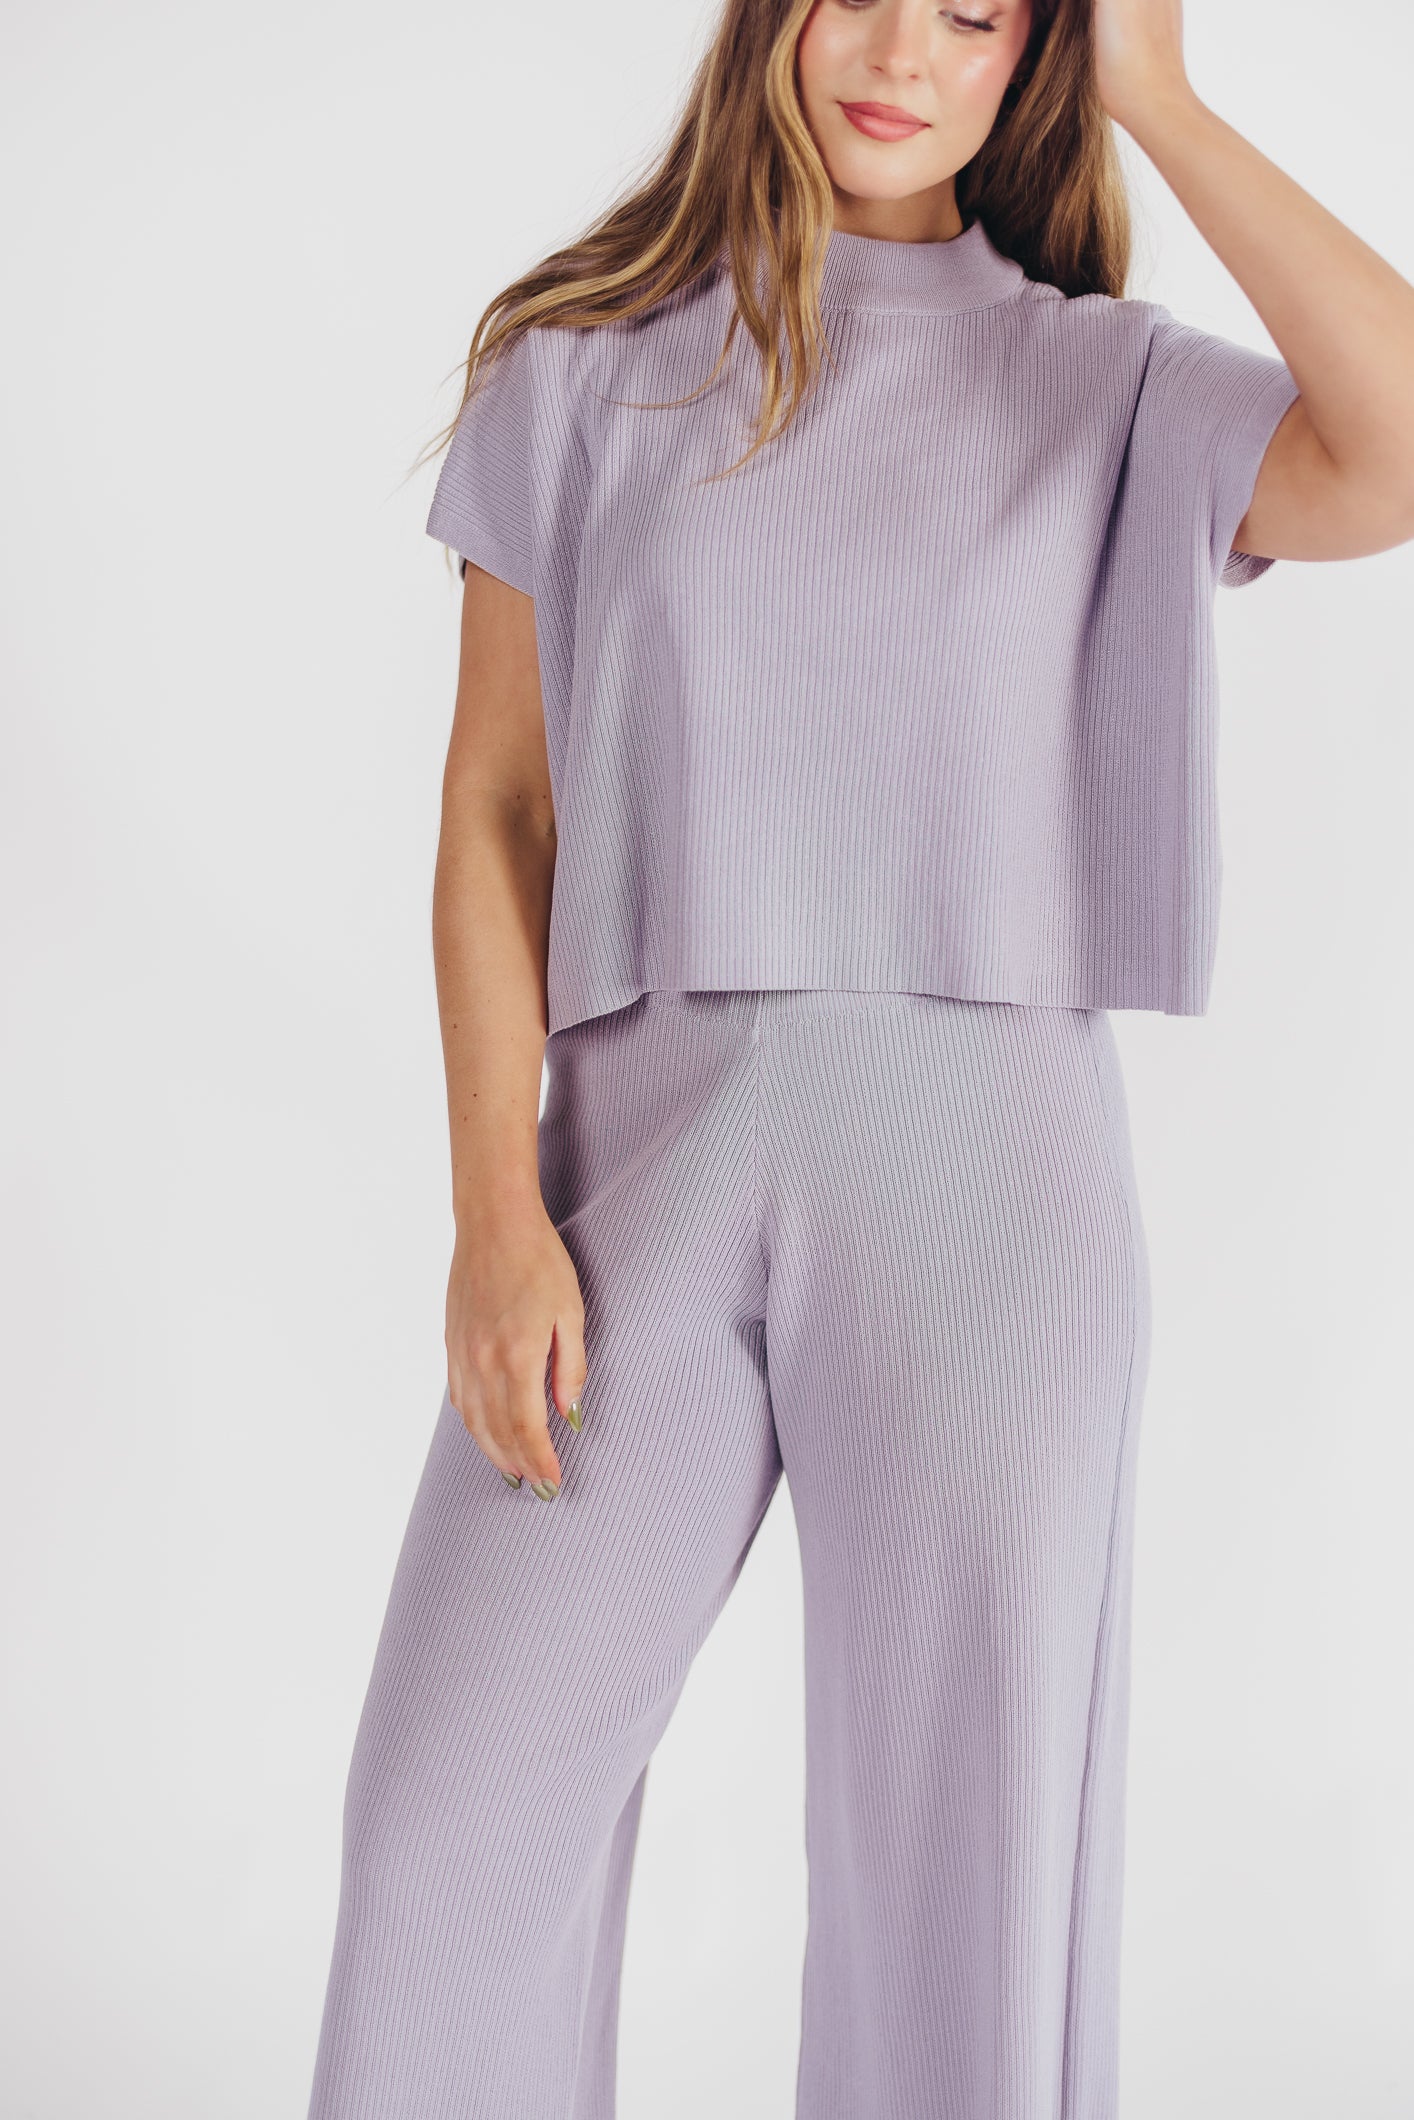 Tripp Knit Top and Pant Set in Blue Grey